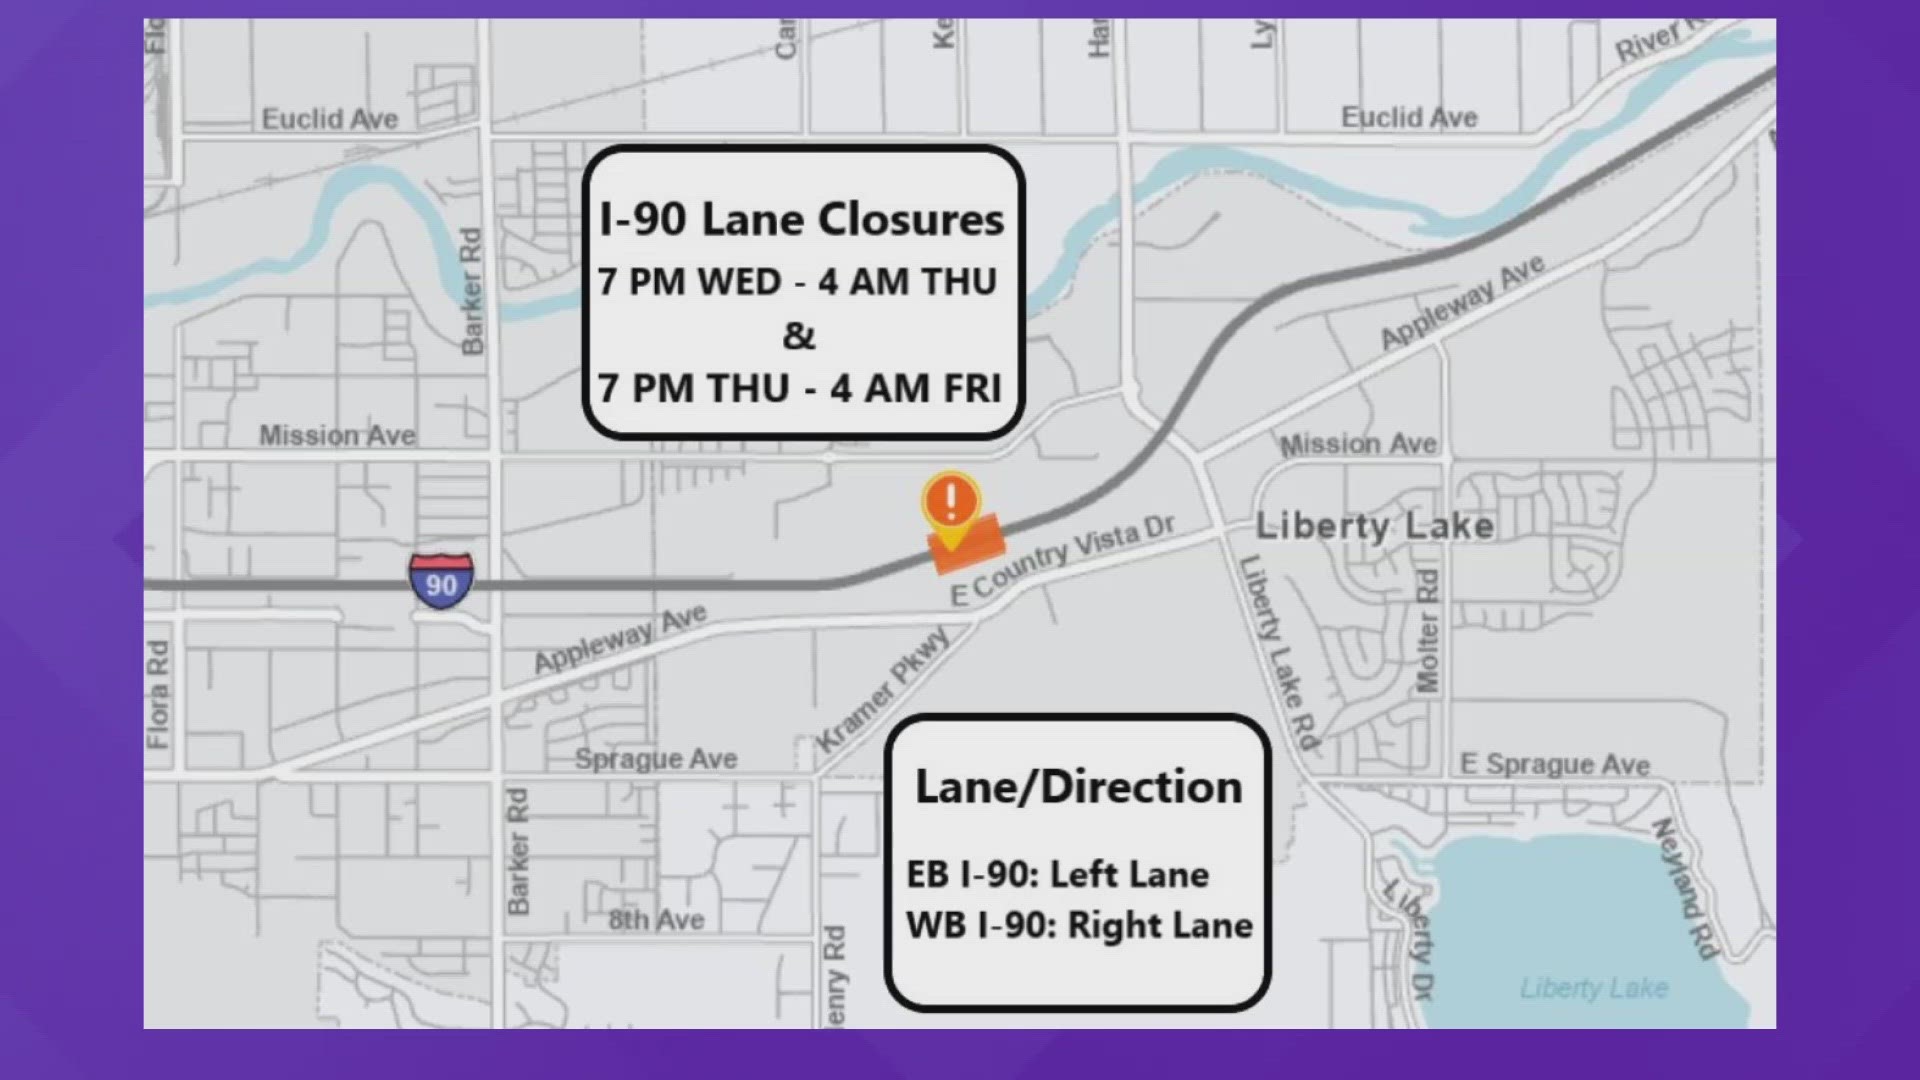 The overnight closures are for road work.